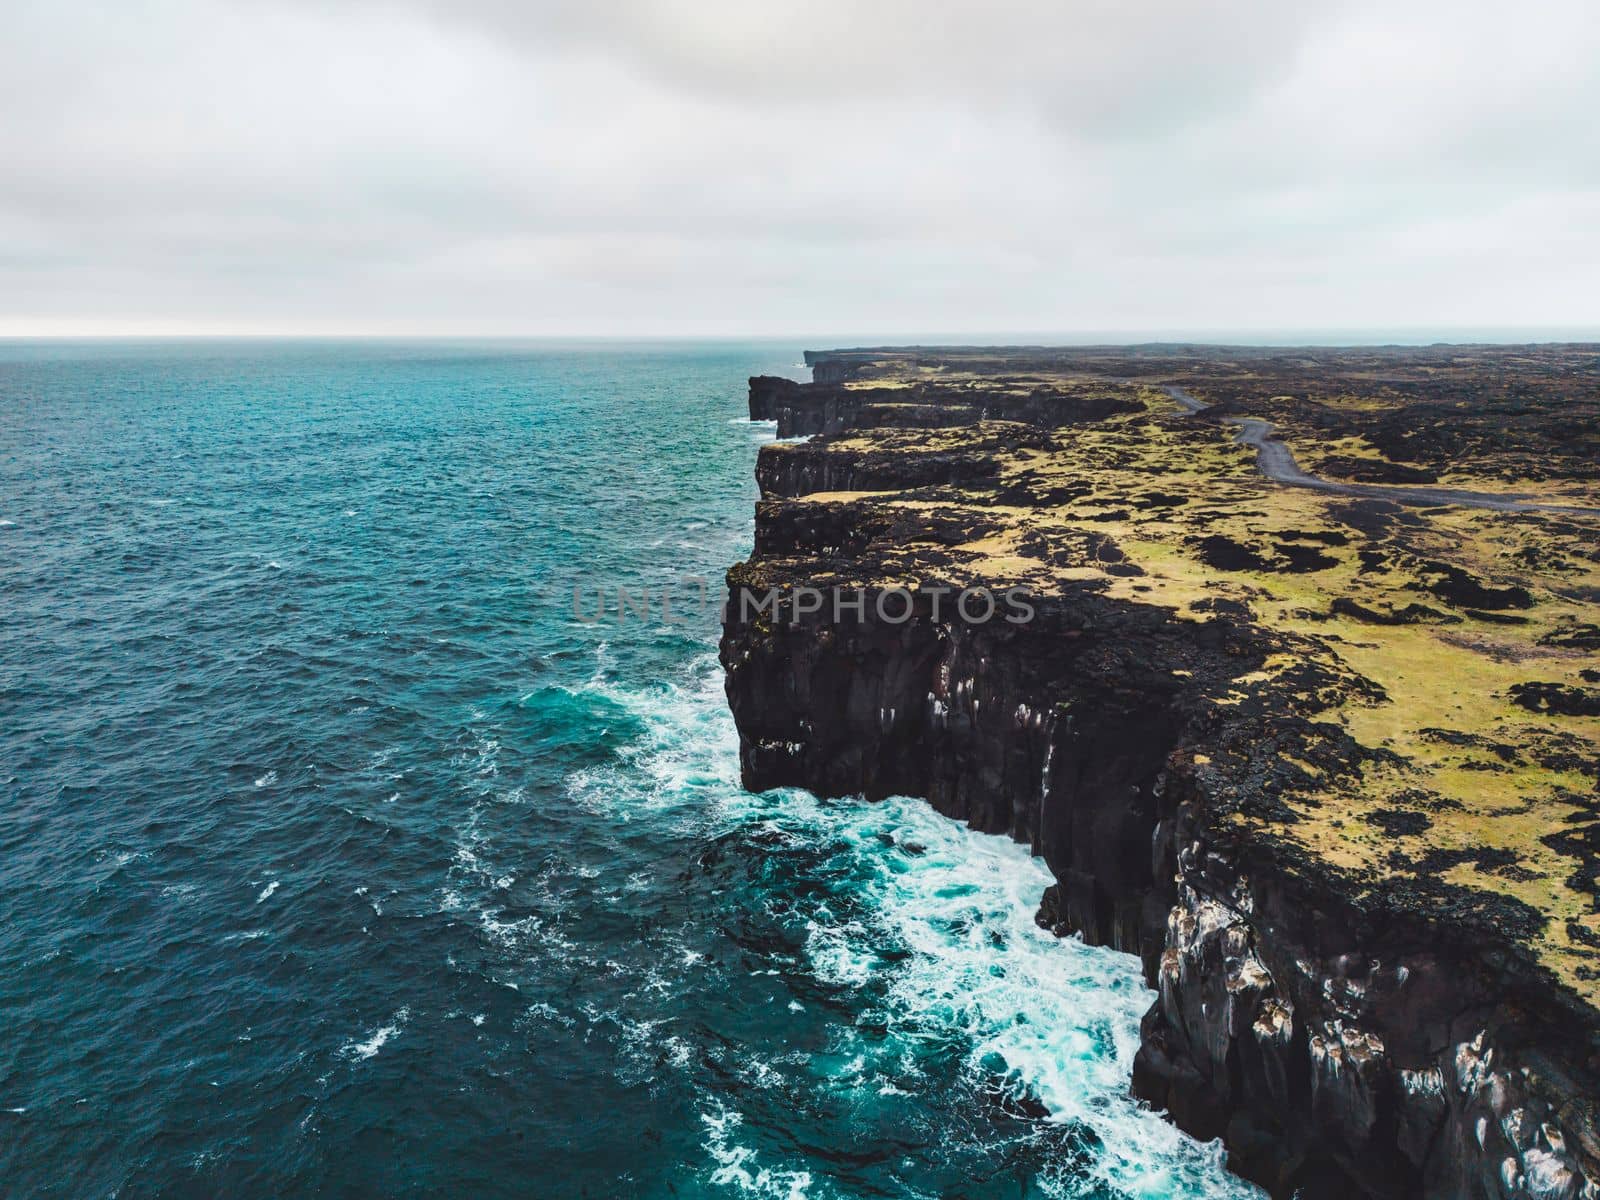 View of the sea in West Iceland highlands, Snaefellsnes peninsula, View Point near Svortuloft Lighthouse. Spectacular black volcanic rocky ocean coast with cave arch and towers. High quality photo